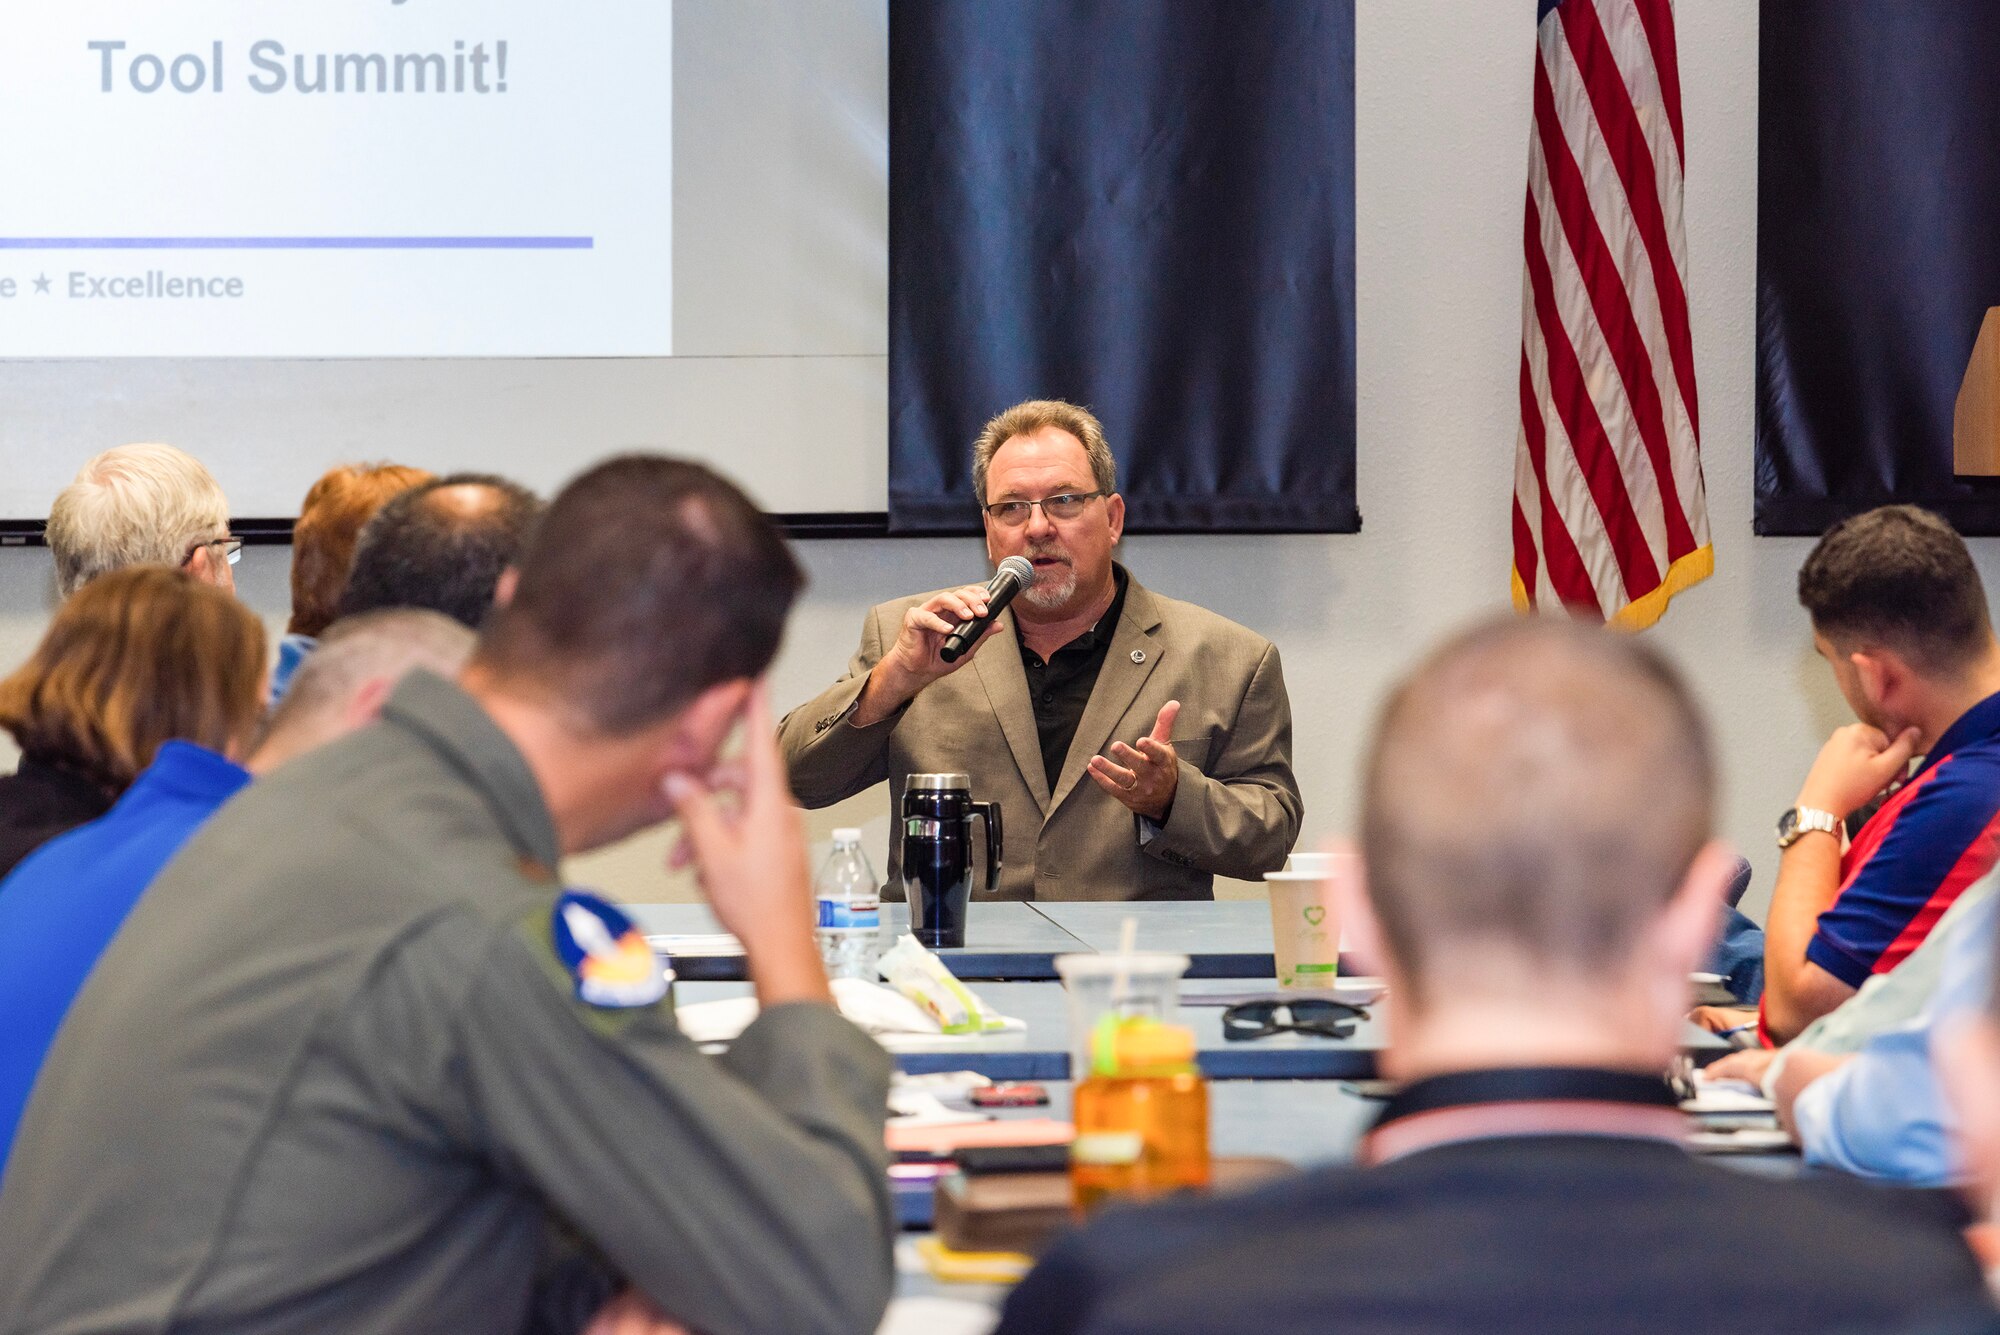 Dan Osburn, 412th Test Wing Technical Director, provides remarks during the first-ever Data Analysis Tool Summit on Edwards Air Force Base, California, Sept. 12-13. The summit featured presentations from a mix of teams and technical disciplines to foster discussions on the current and future state of data analysis tools and scalable/shareable developments in all things data analysis. (Air Force photo by Lindsey Iniguez)